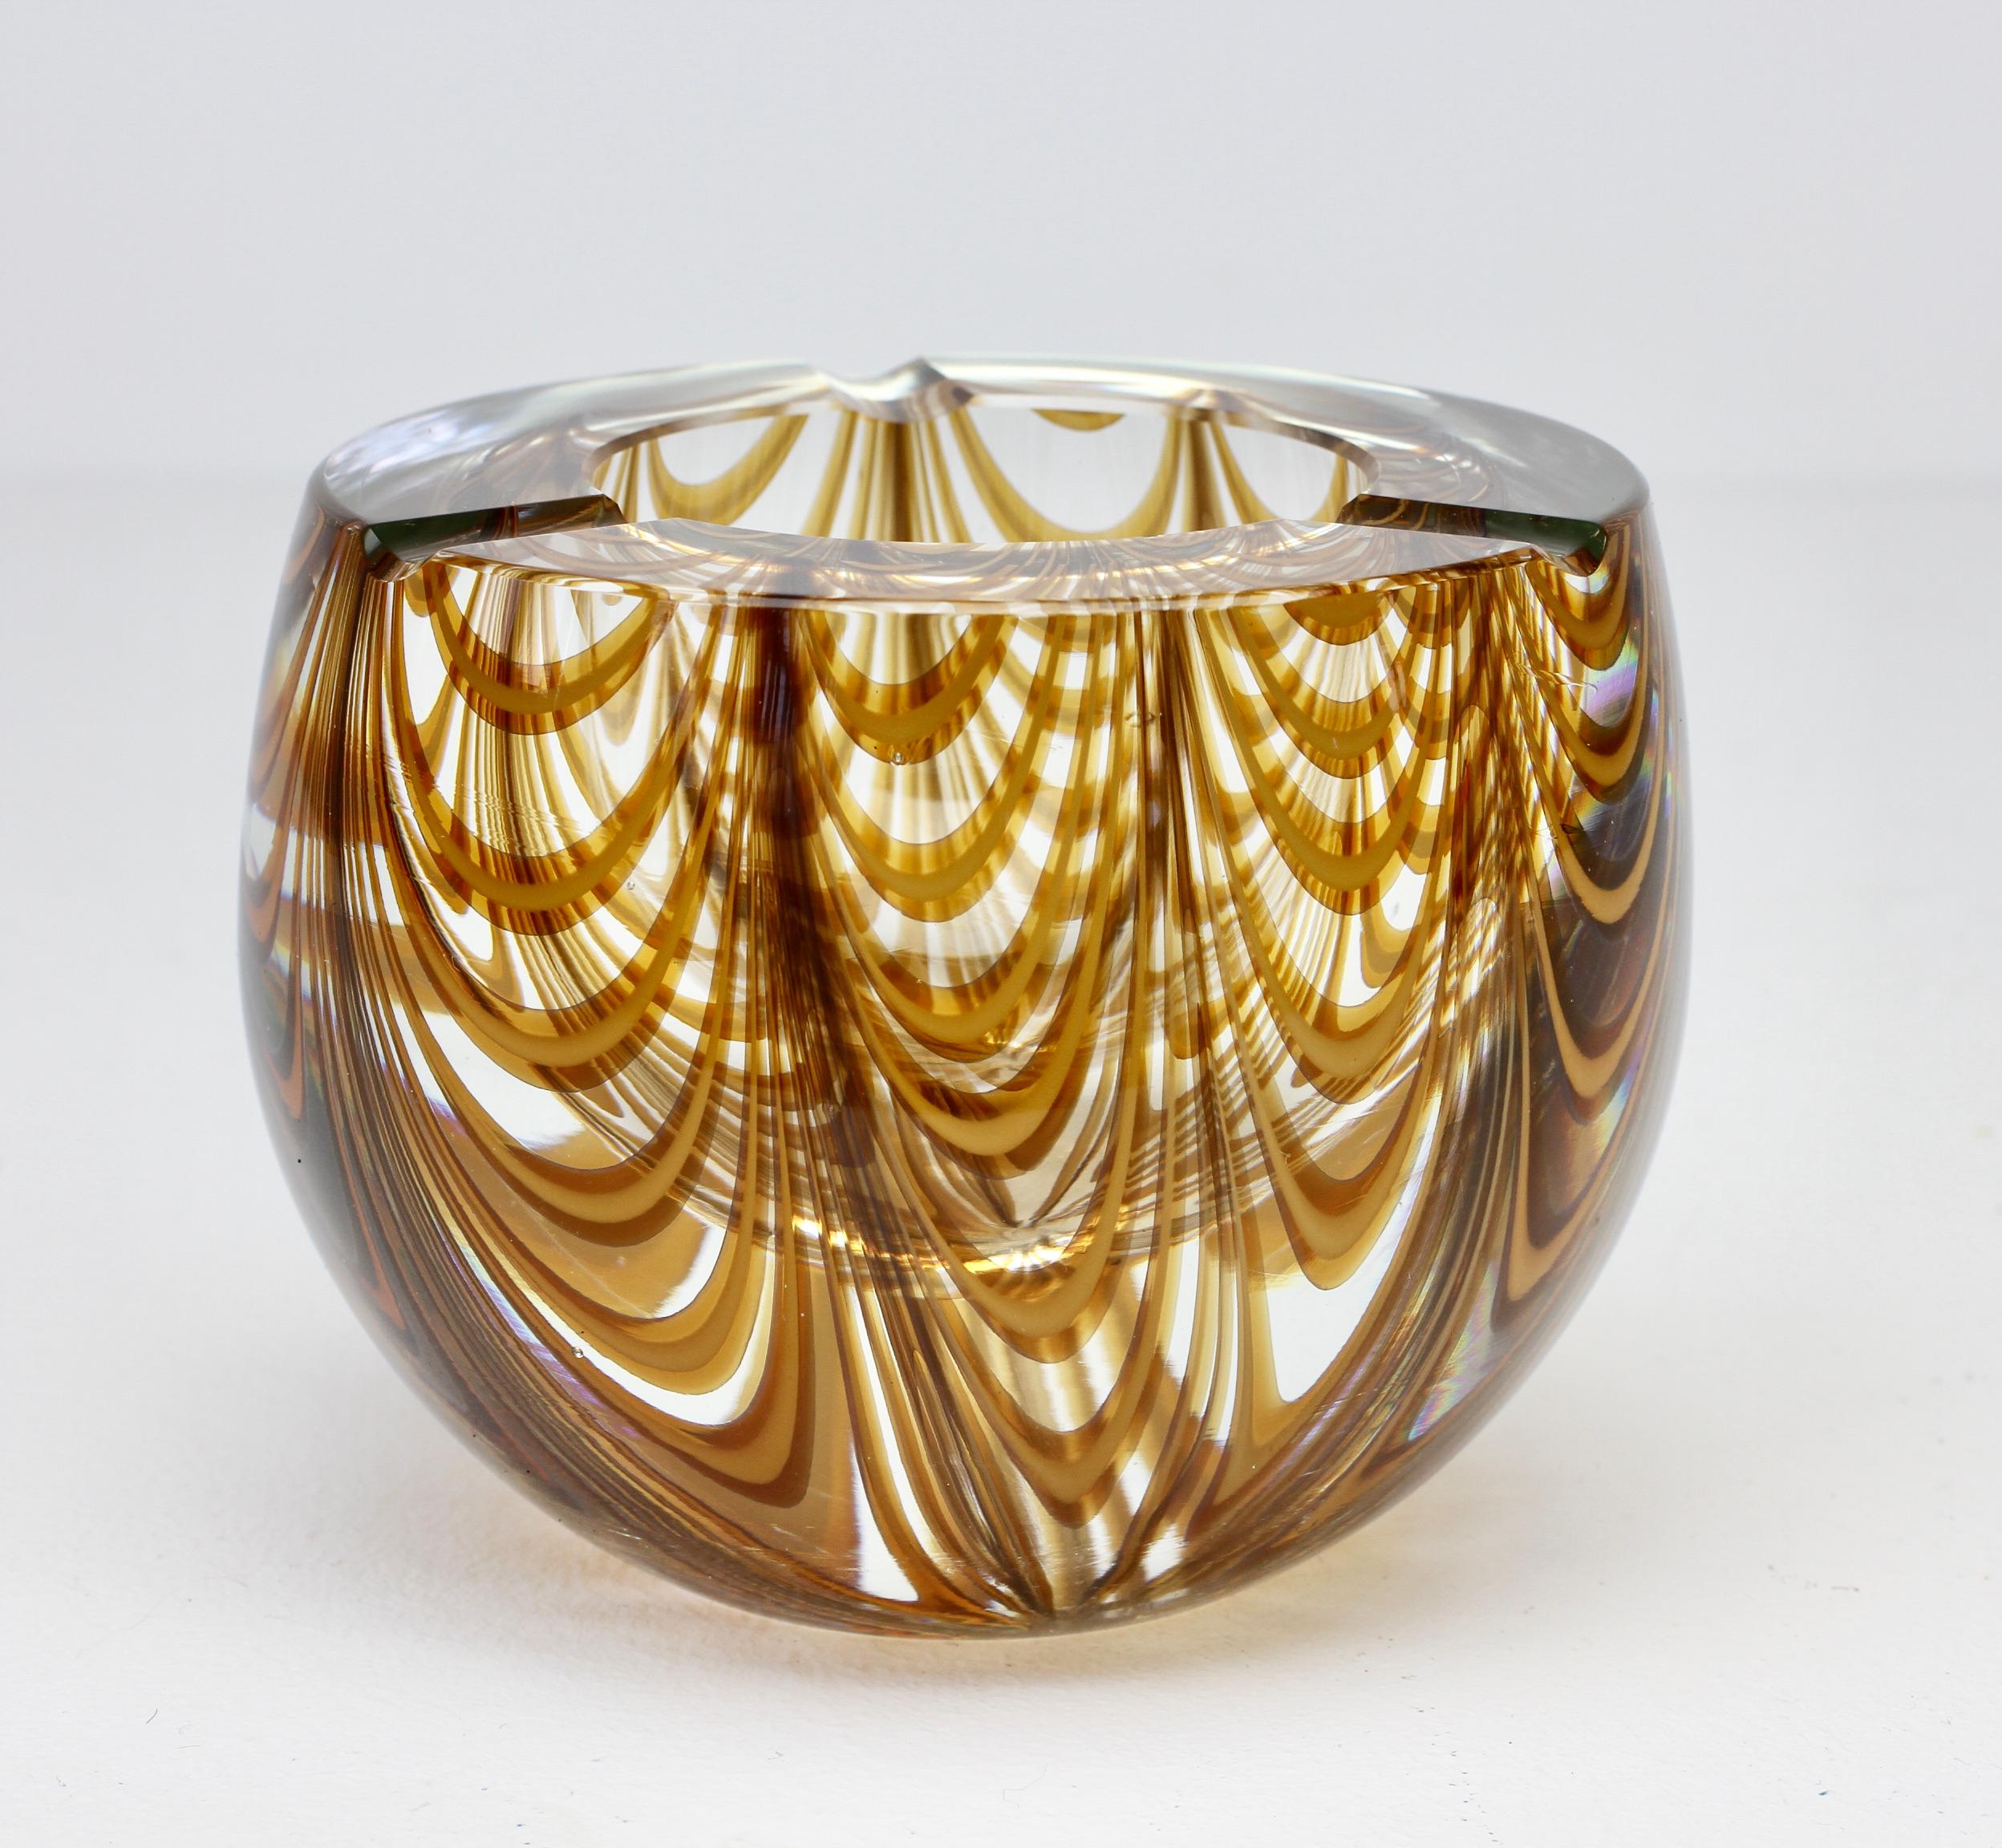 Antonio da Ros (attributed) for Cenedese large and heavy vintage Mid-Century Modern Italian Murano glass ashtray, circa 1965-1975. This large, heavy piece of glass features an asymmetric design of amber toned glass curved 'Zebrato' stripes encased